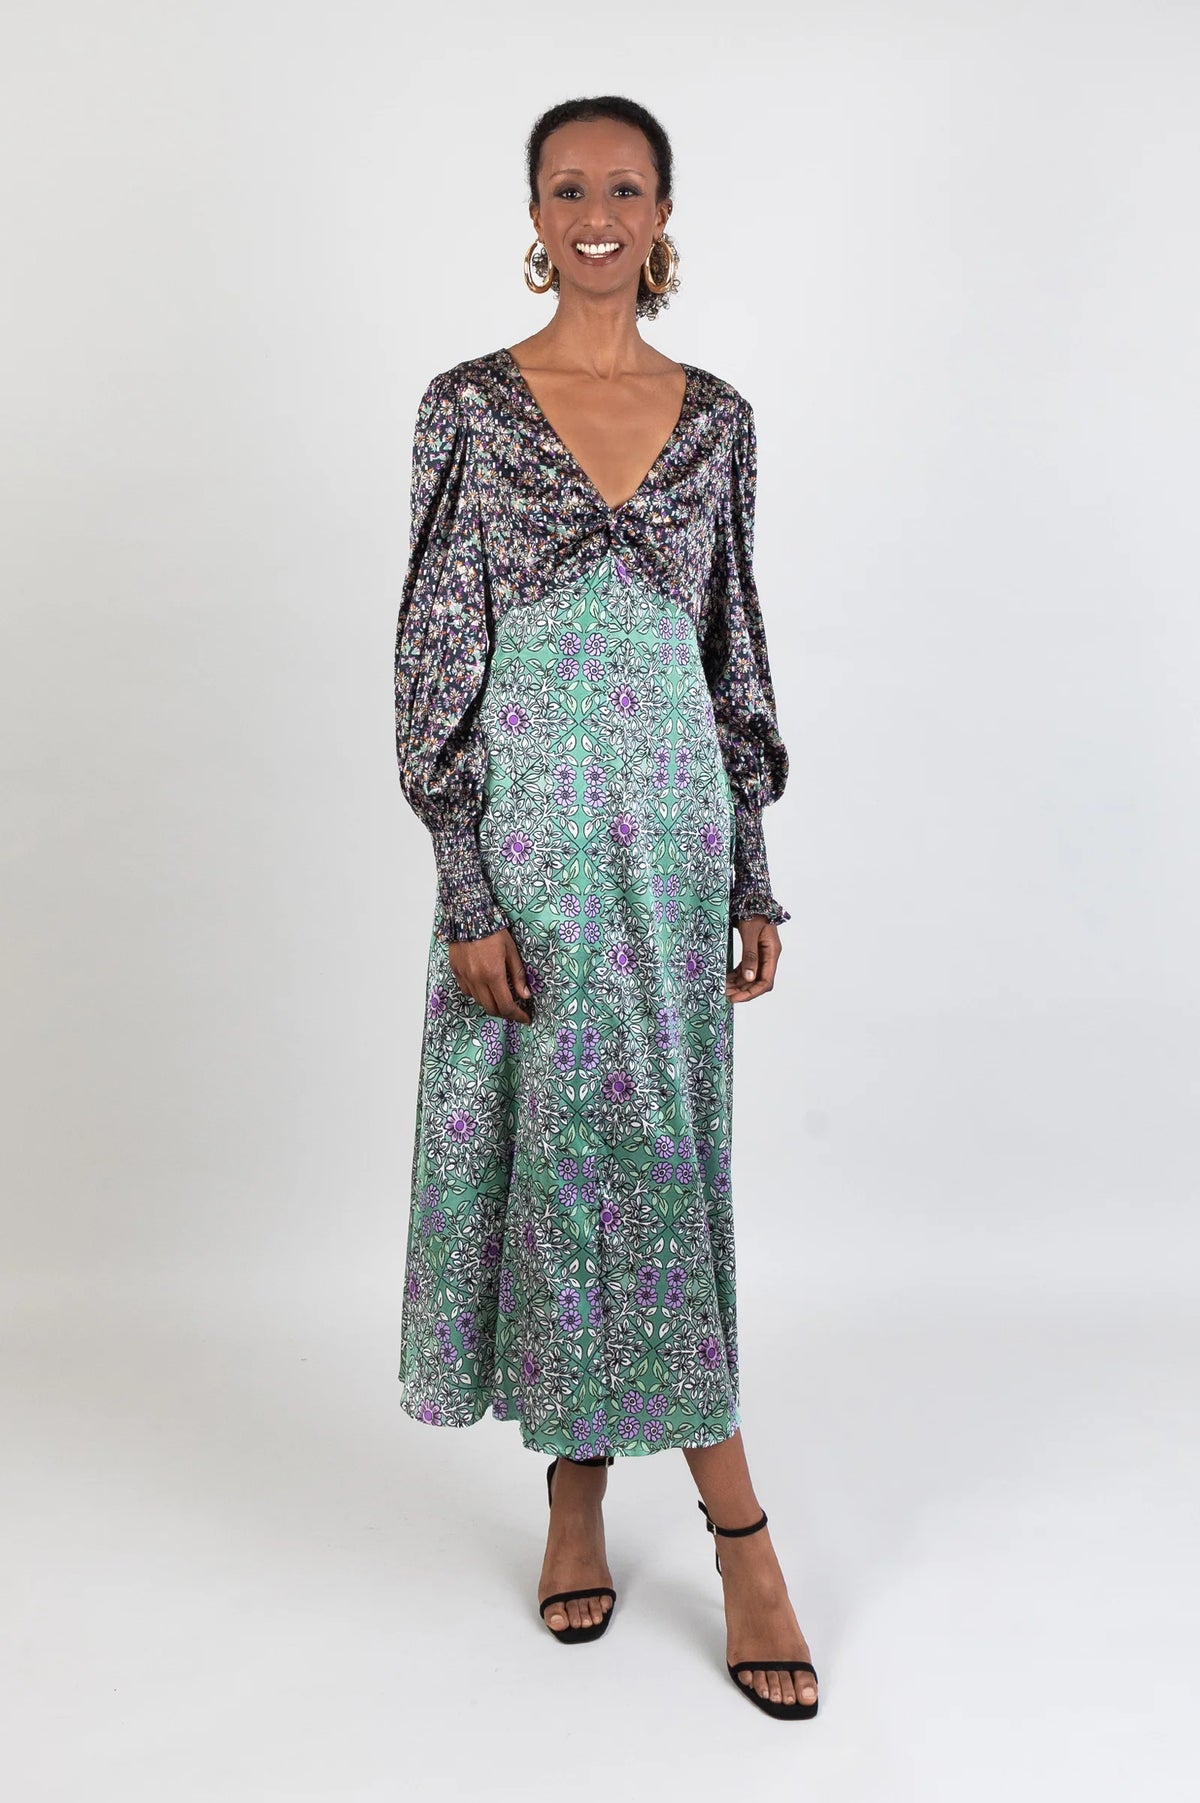 Twisted front V neck midi dress in two contrasting silk fabrics with long sleeves and shirred cuffs in a deep green and black tile print